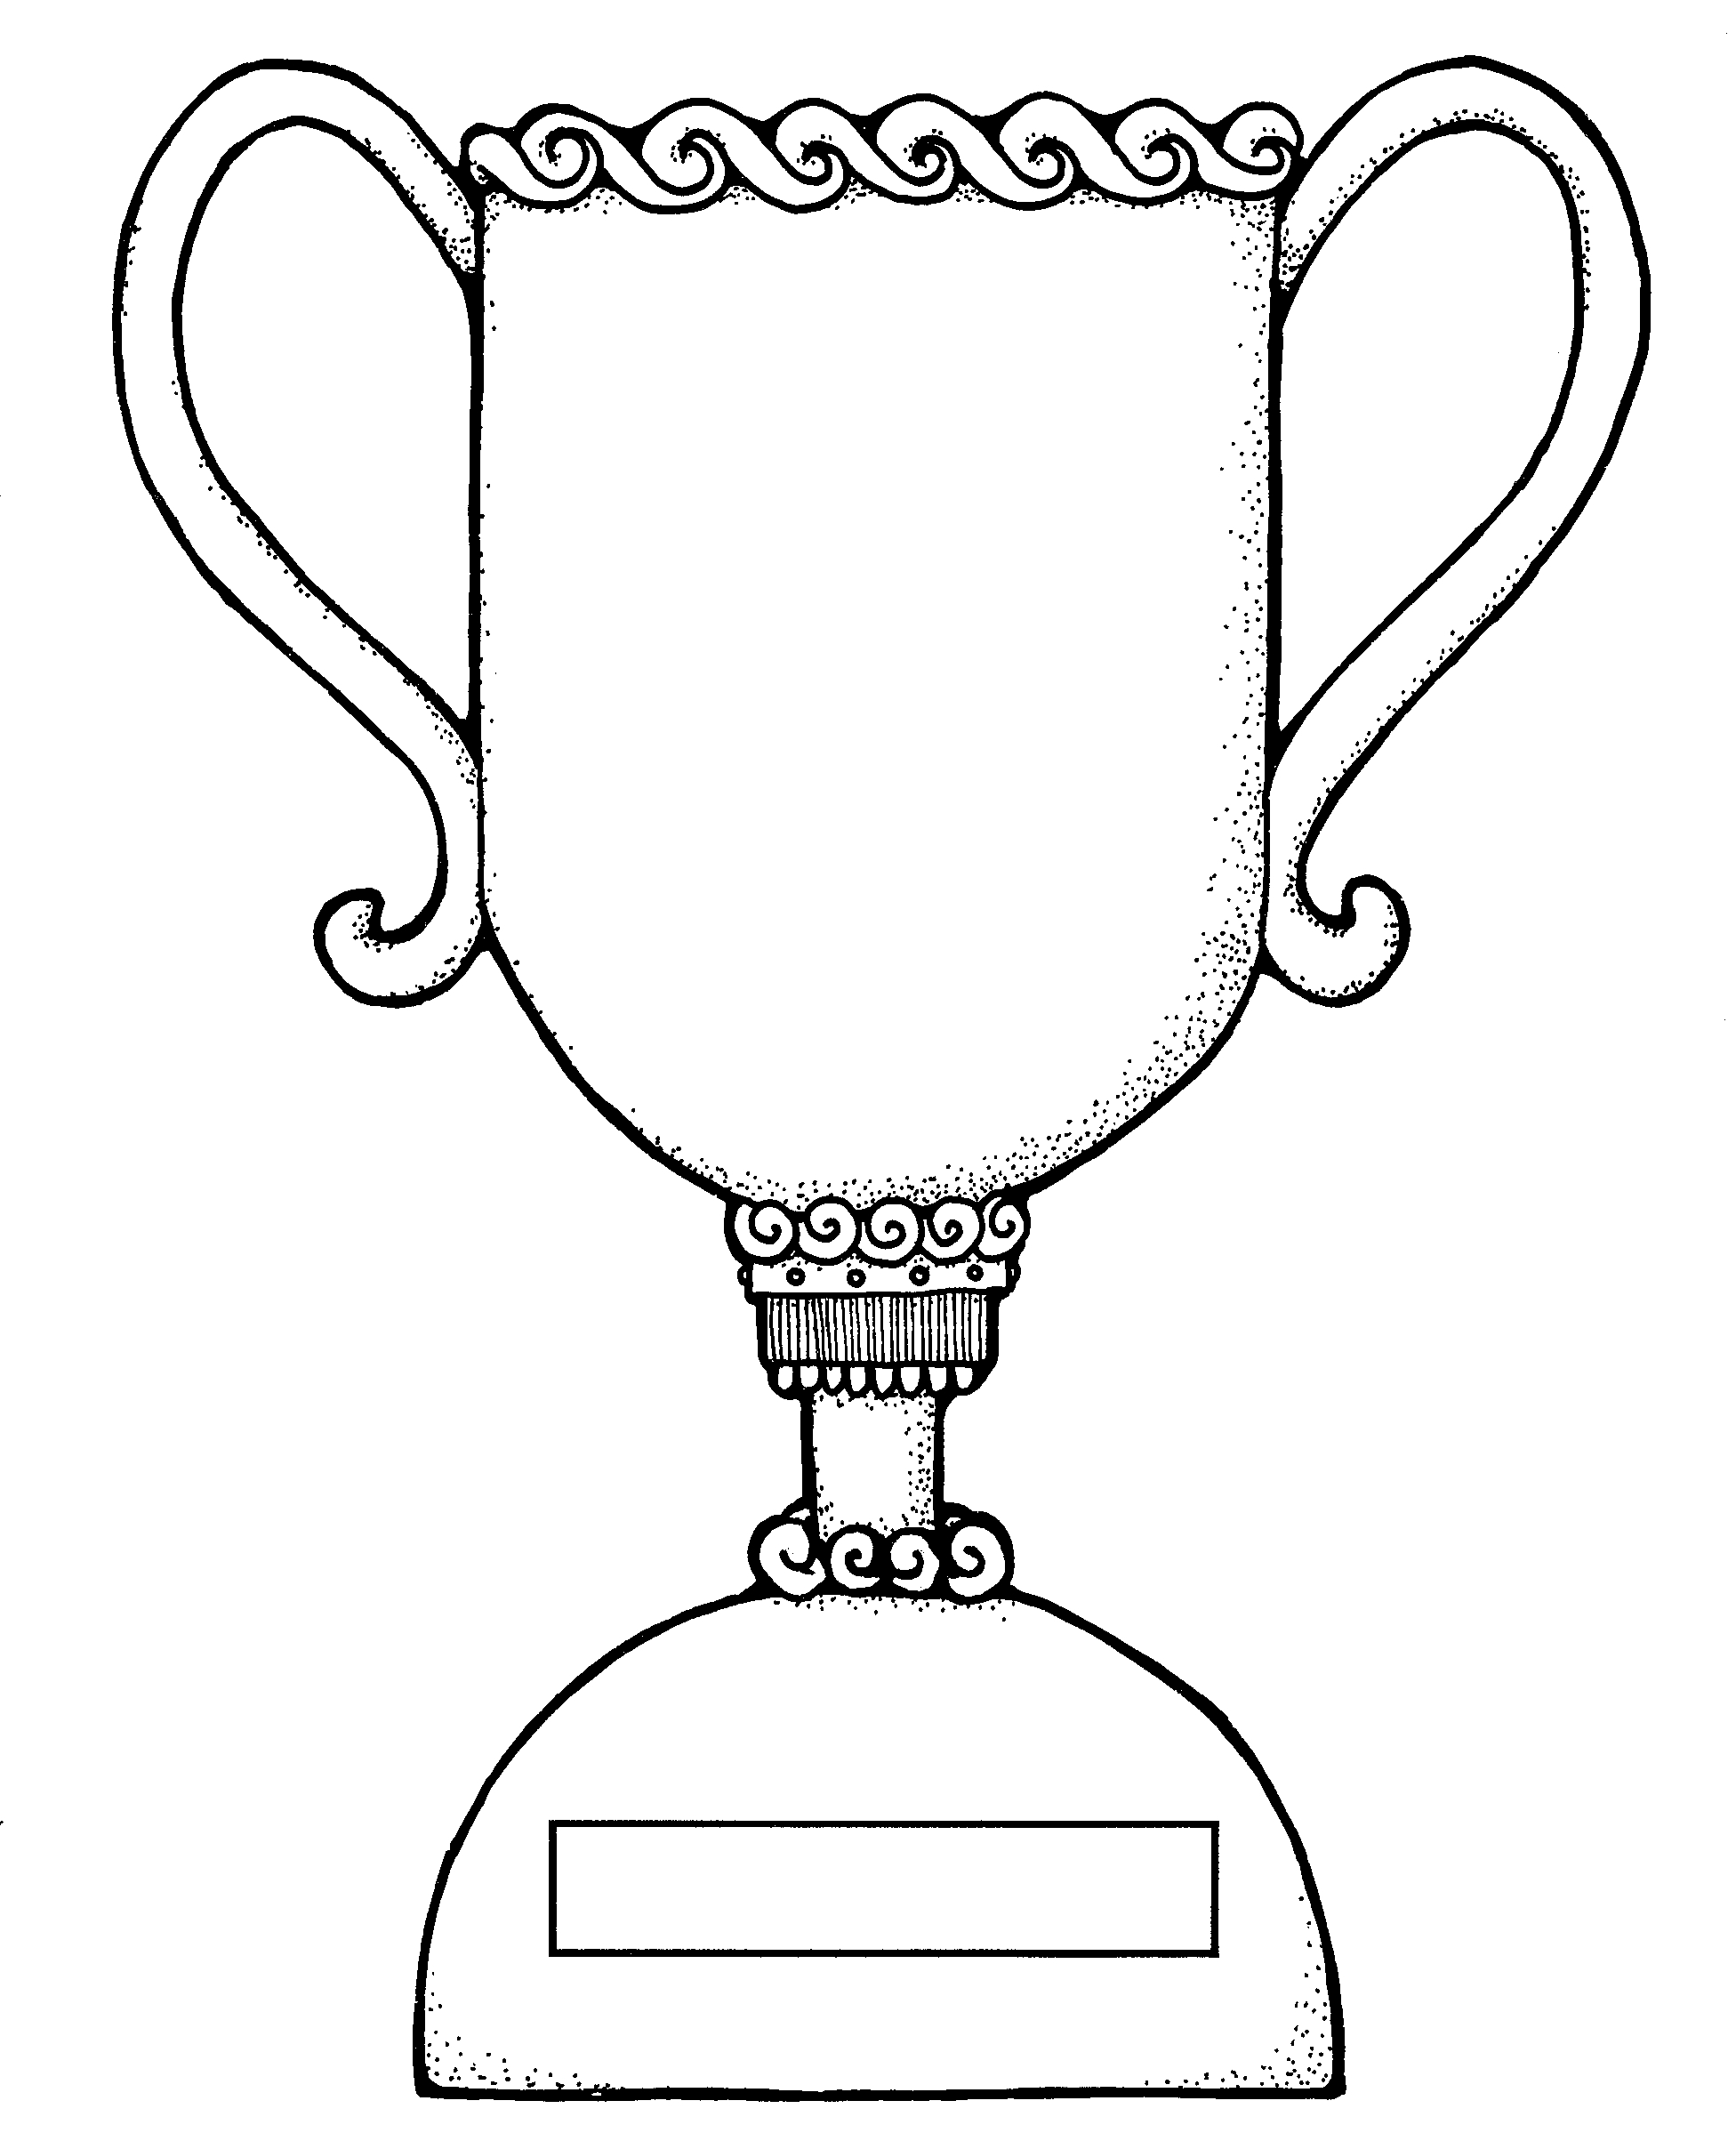 Free Sports Cup Cliparts, Download Free Clip Art, Free Clip